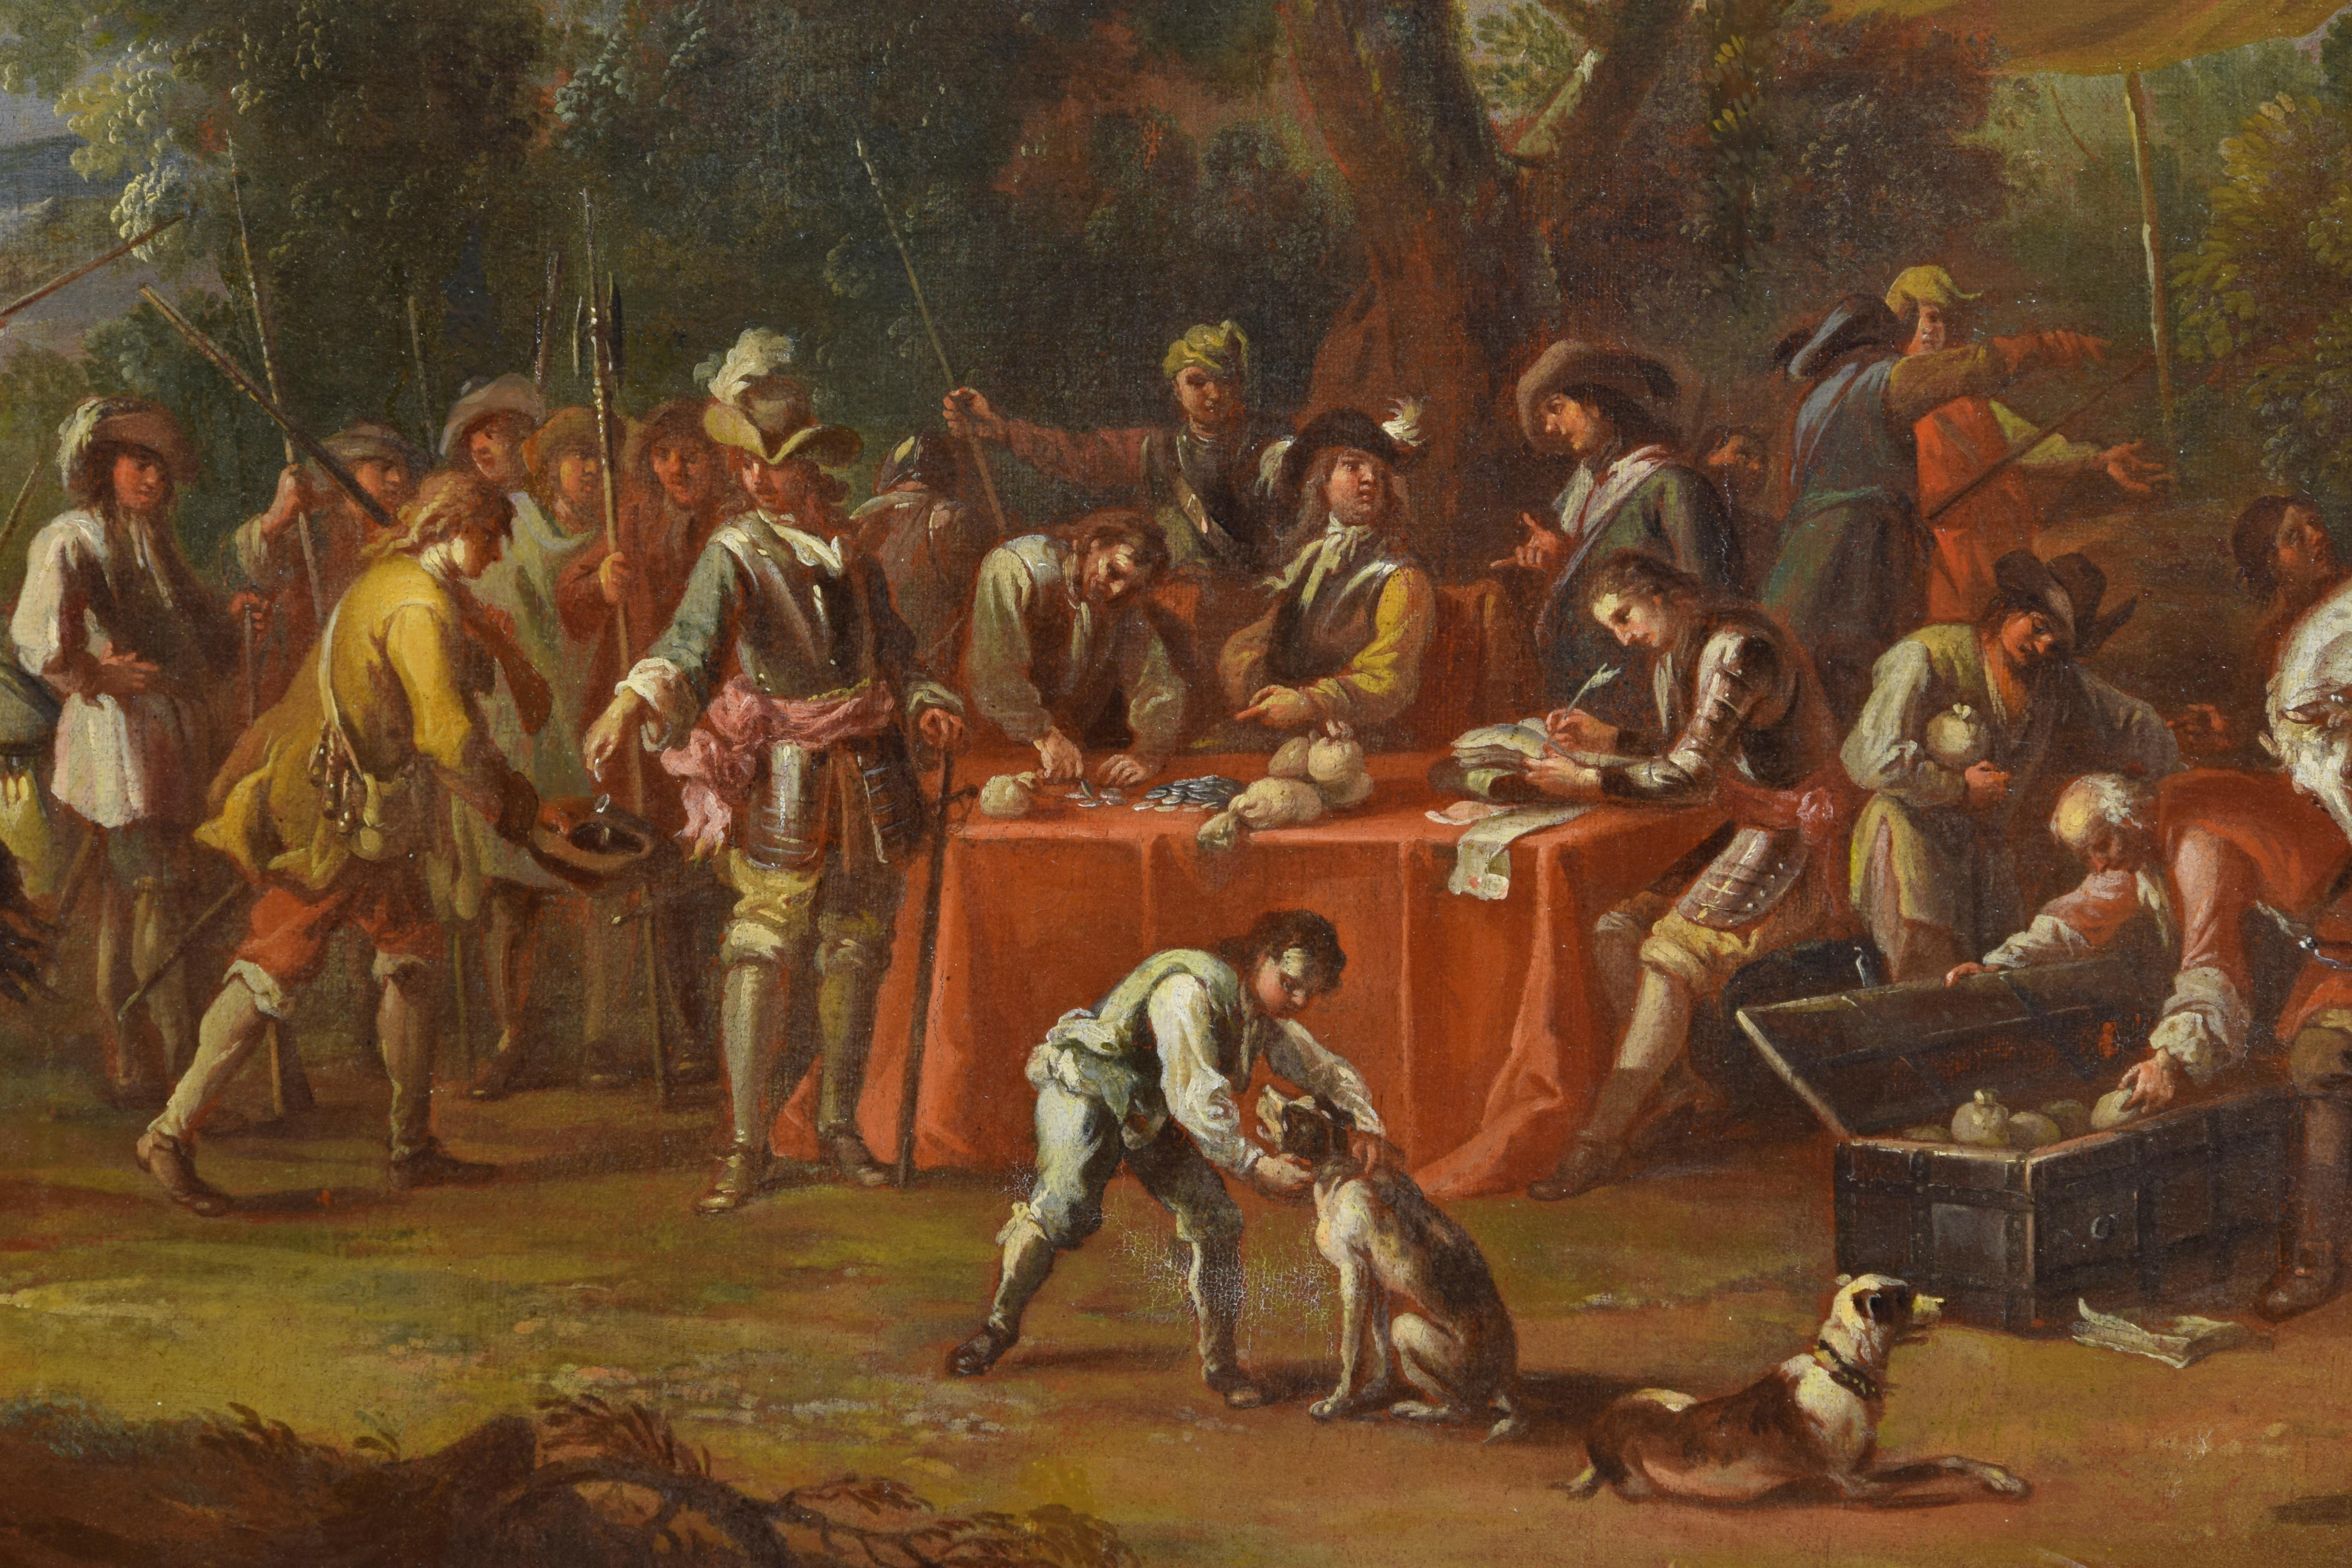 European 17th Century, Dutch Oil on Canvas Painting with the Pay of Soldiers